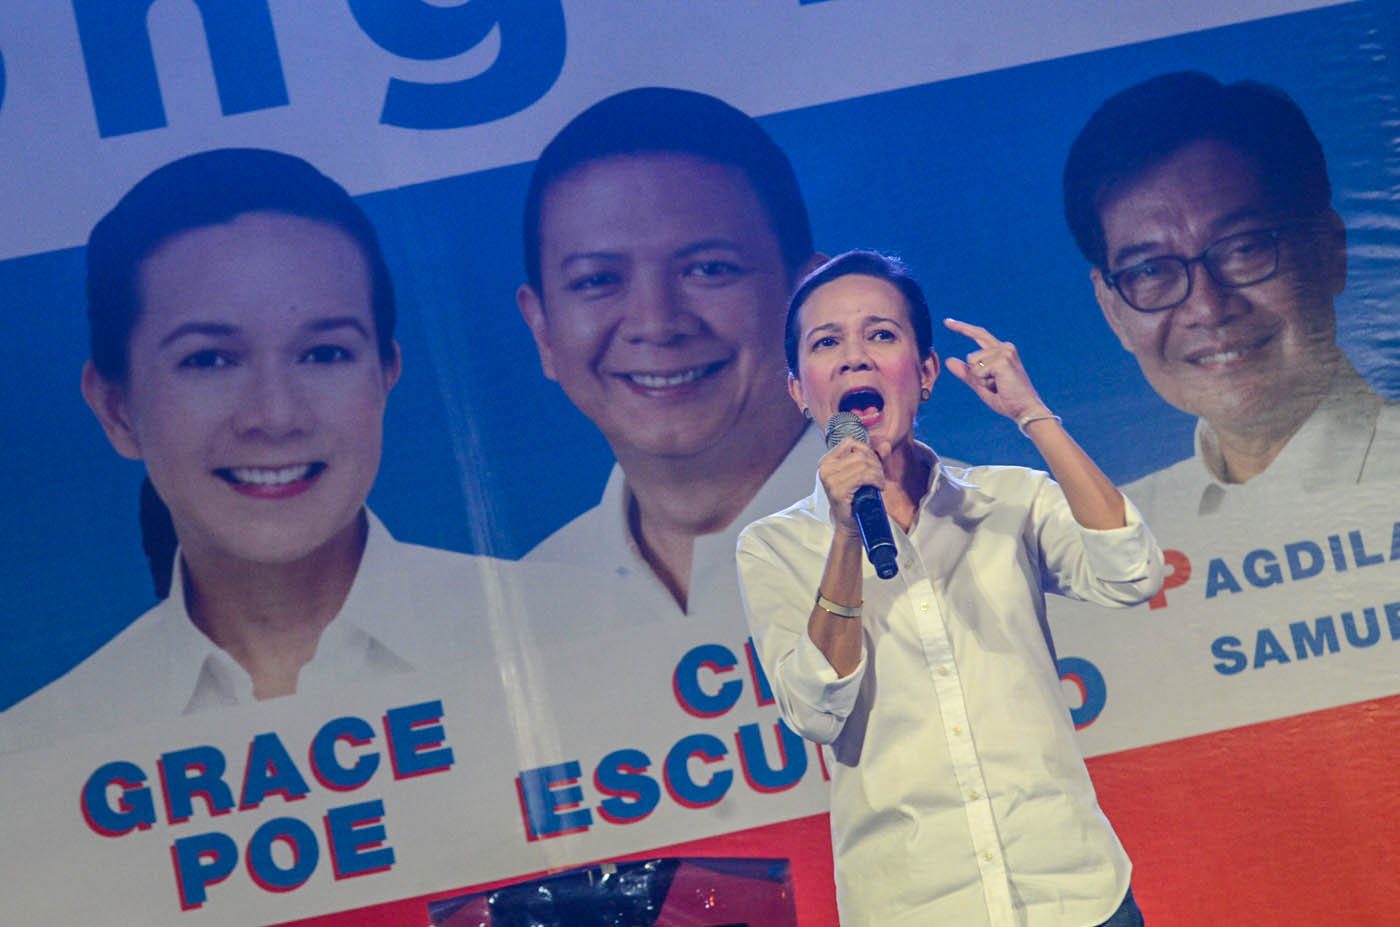 How Grace Poe prepared for the first presidential debate